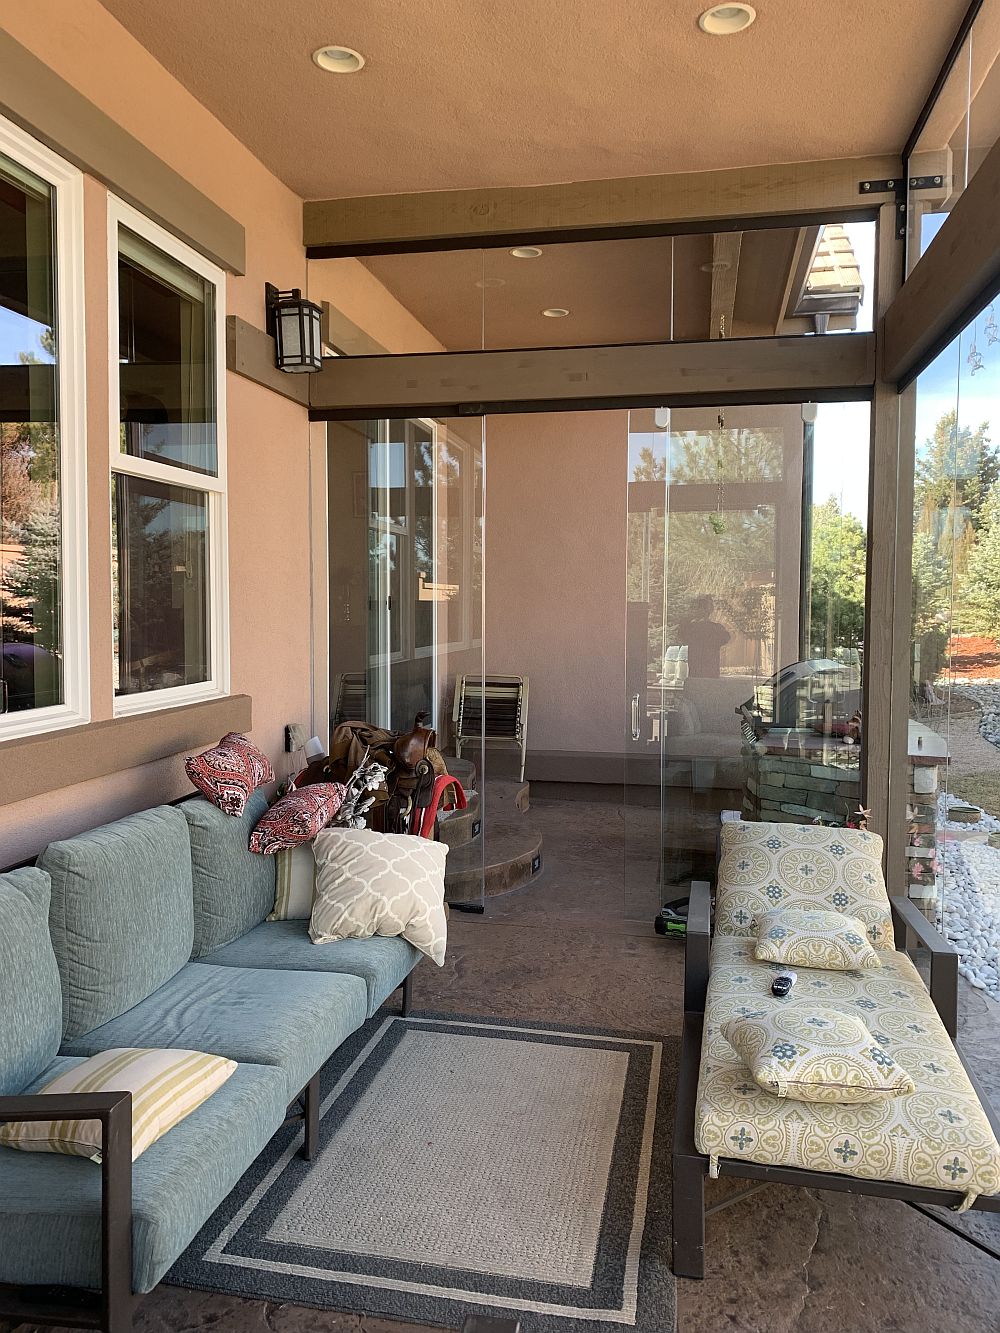 Covered patio turned into full-use 3-season room with glass walls and doors.